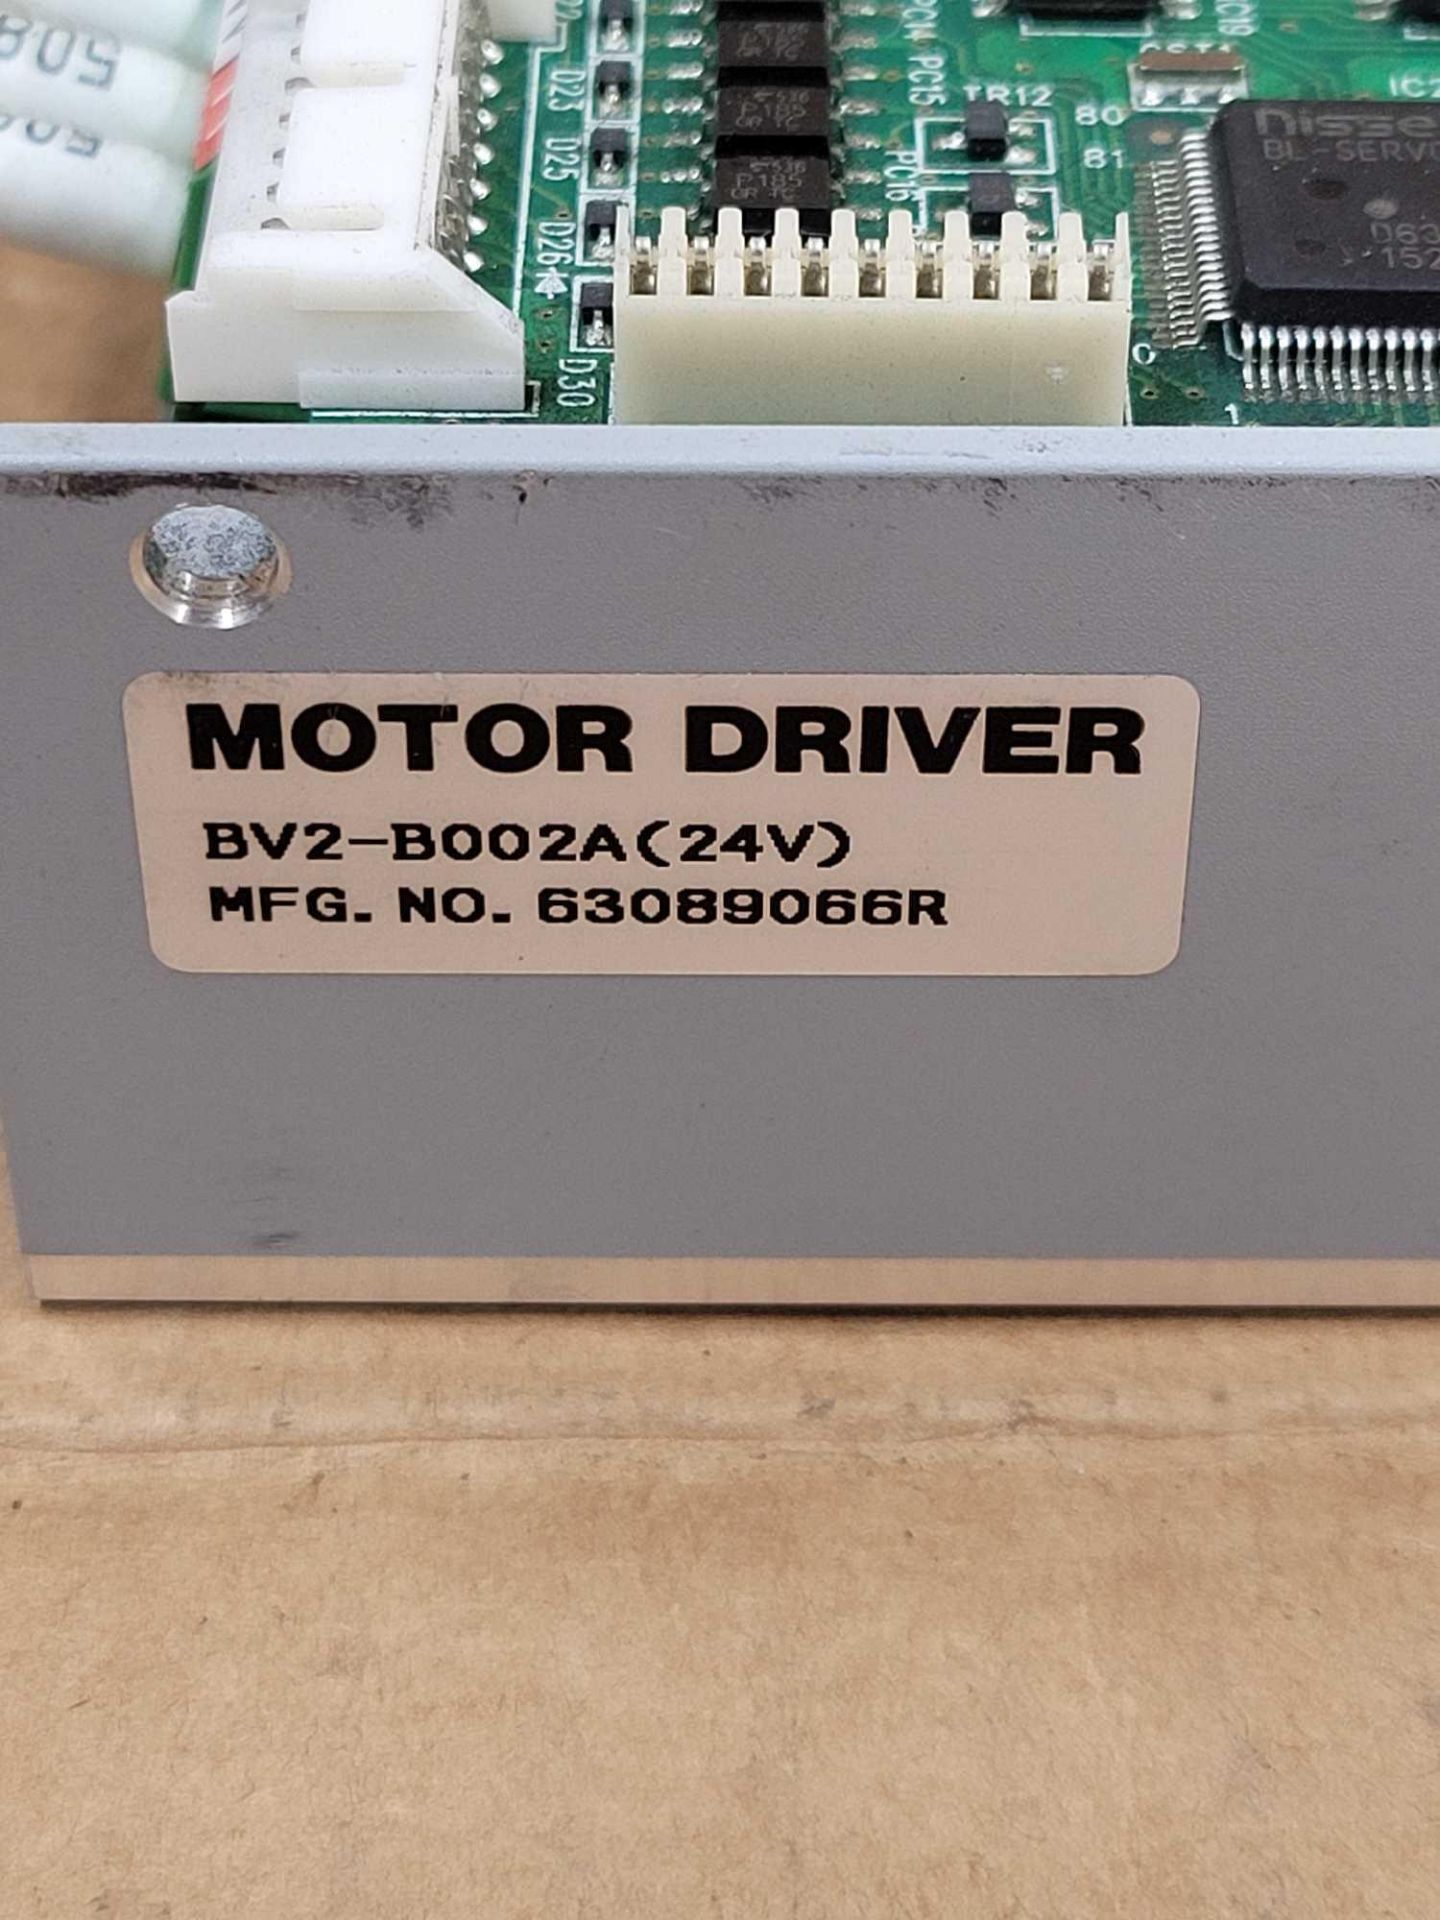 LOT OF 4 CREFORM BV2-B002A(24V) / Motor Driver from Creform AGV Tugger  /  Lot Weight: 4.0 lbs - Image 3 of 8